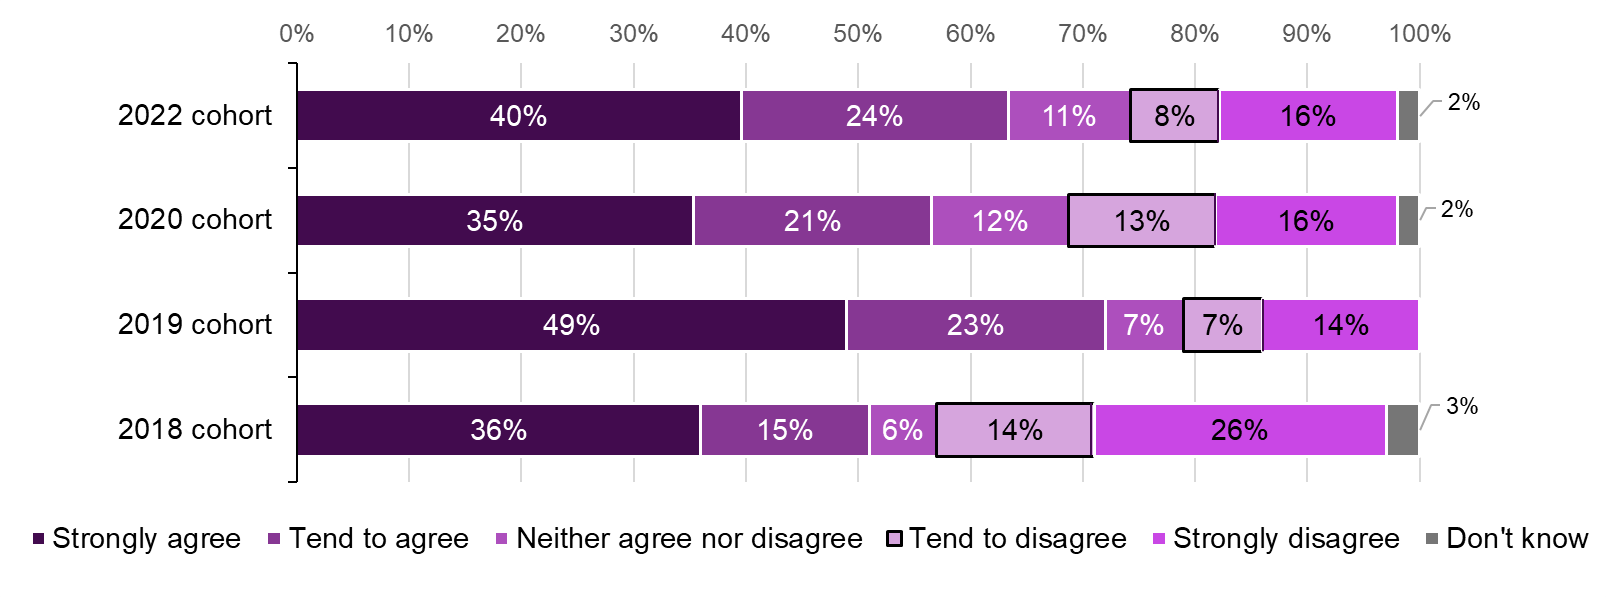 This figure compares proportion of those survey participants who were in work at the time of the survey in terms of agreeing that taking part in Fair Start Scotland helped them to get their jobs across the four waves of the survey. The proportion of people who strongly agreed that that Fair Start Scotland helped them to get their job varied from 35% for Wave 3 survey to 49% for Wave 2 survey. In the current Wave 40% of those in work agreed that Fair Start Scotland heled them to get their job. 